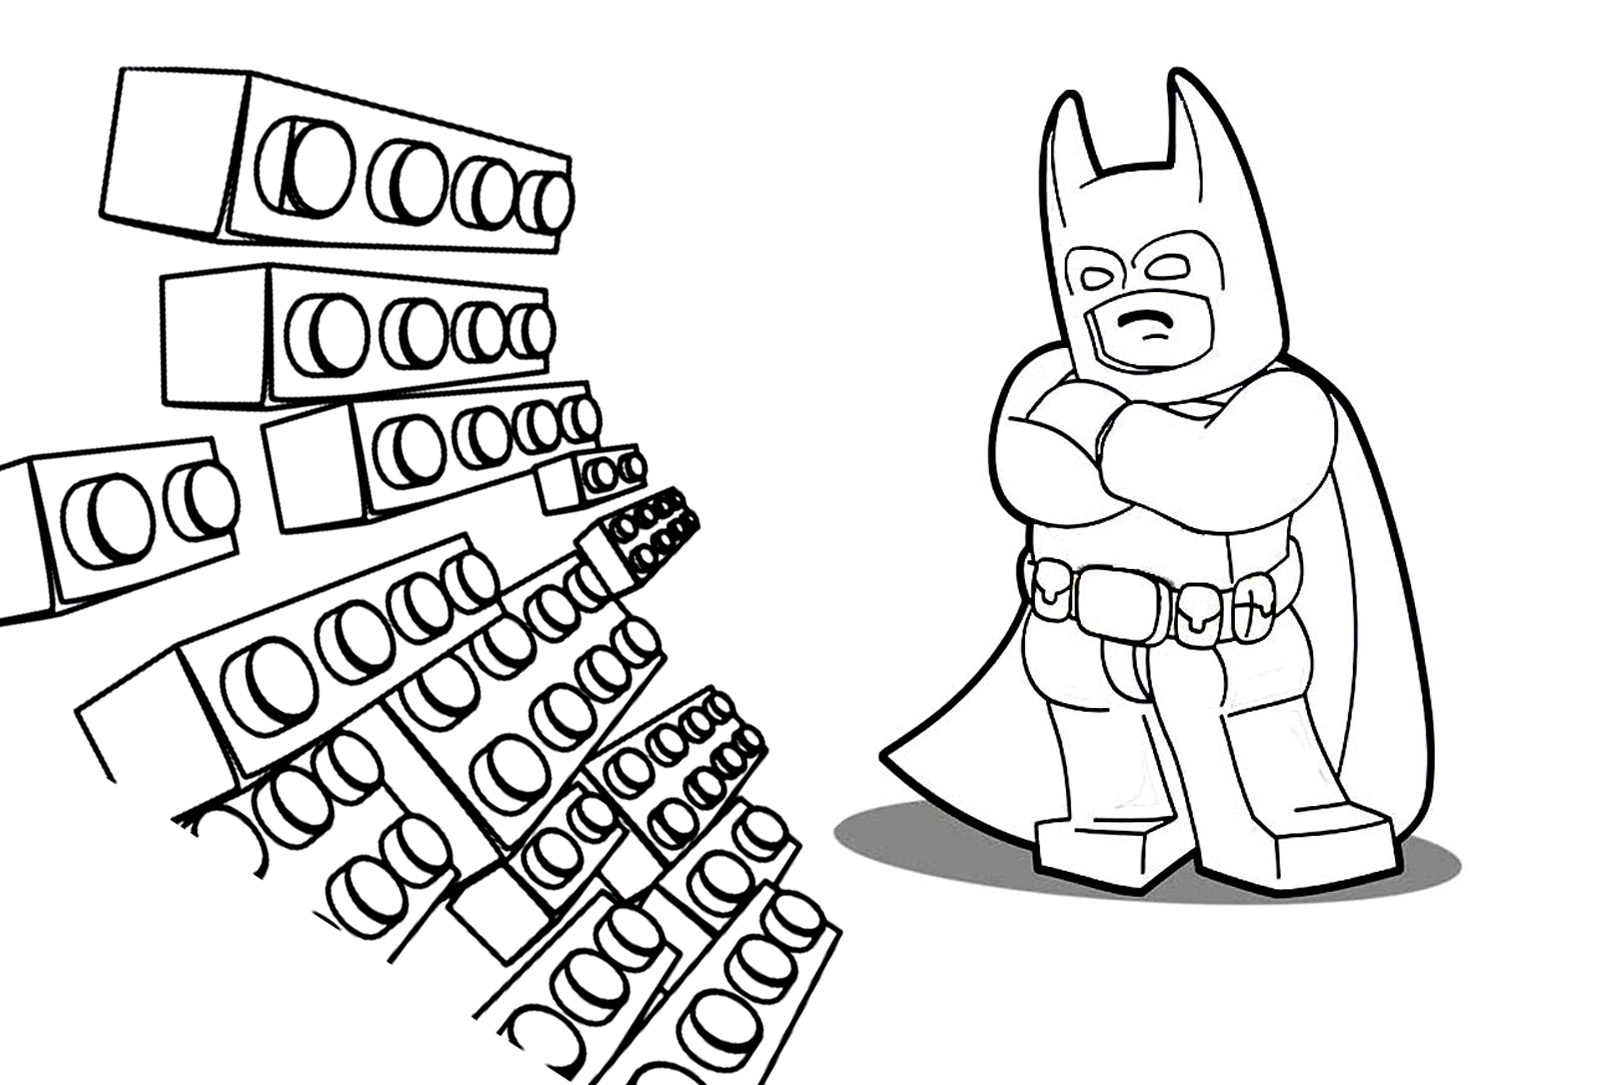 Lego movie coloring pages Coloring for kids coloring adventure